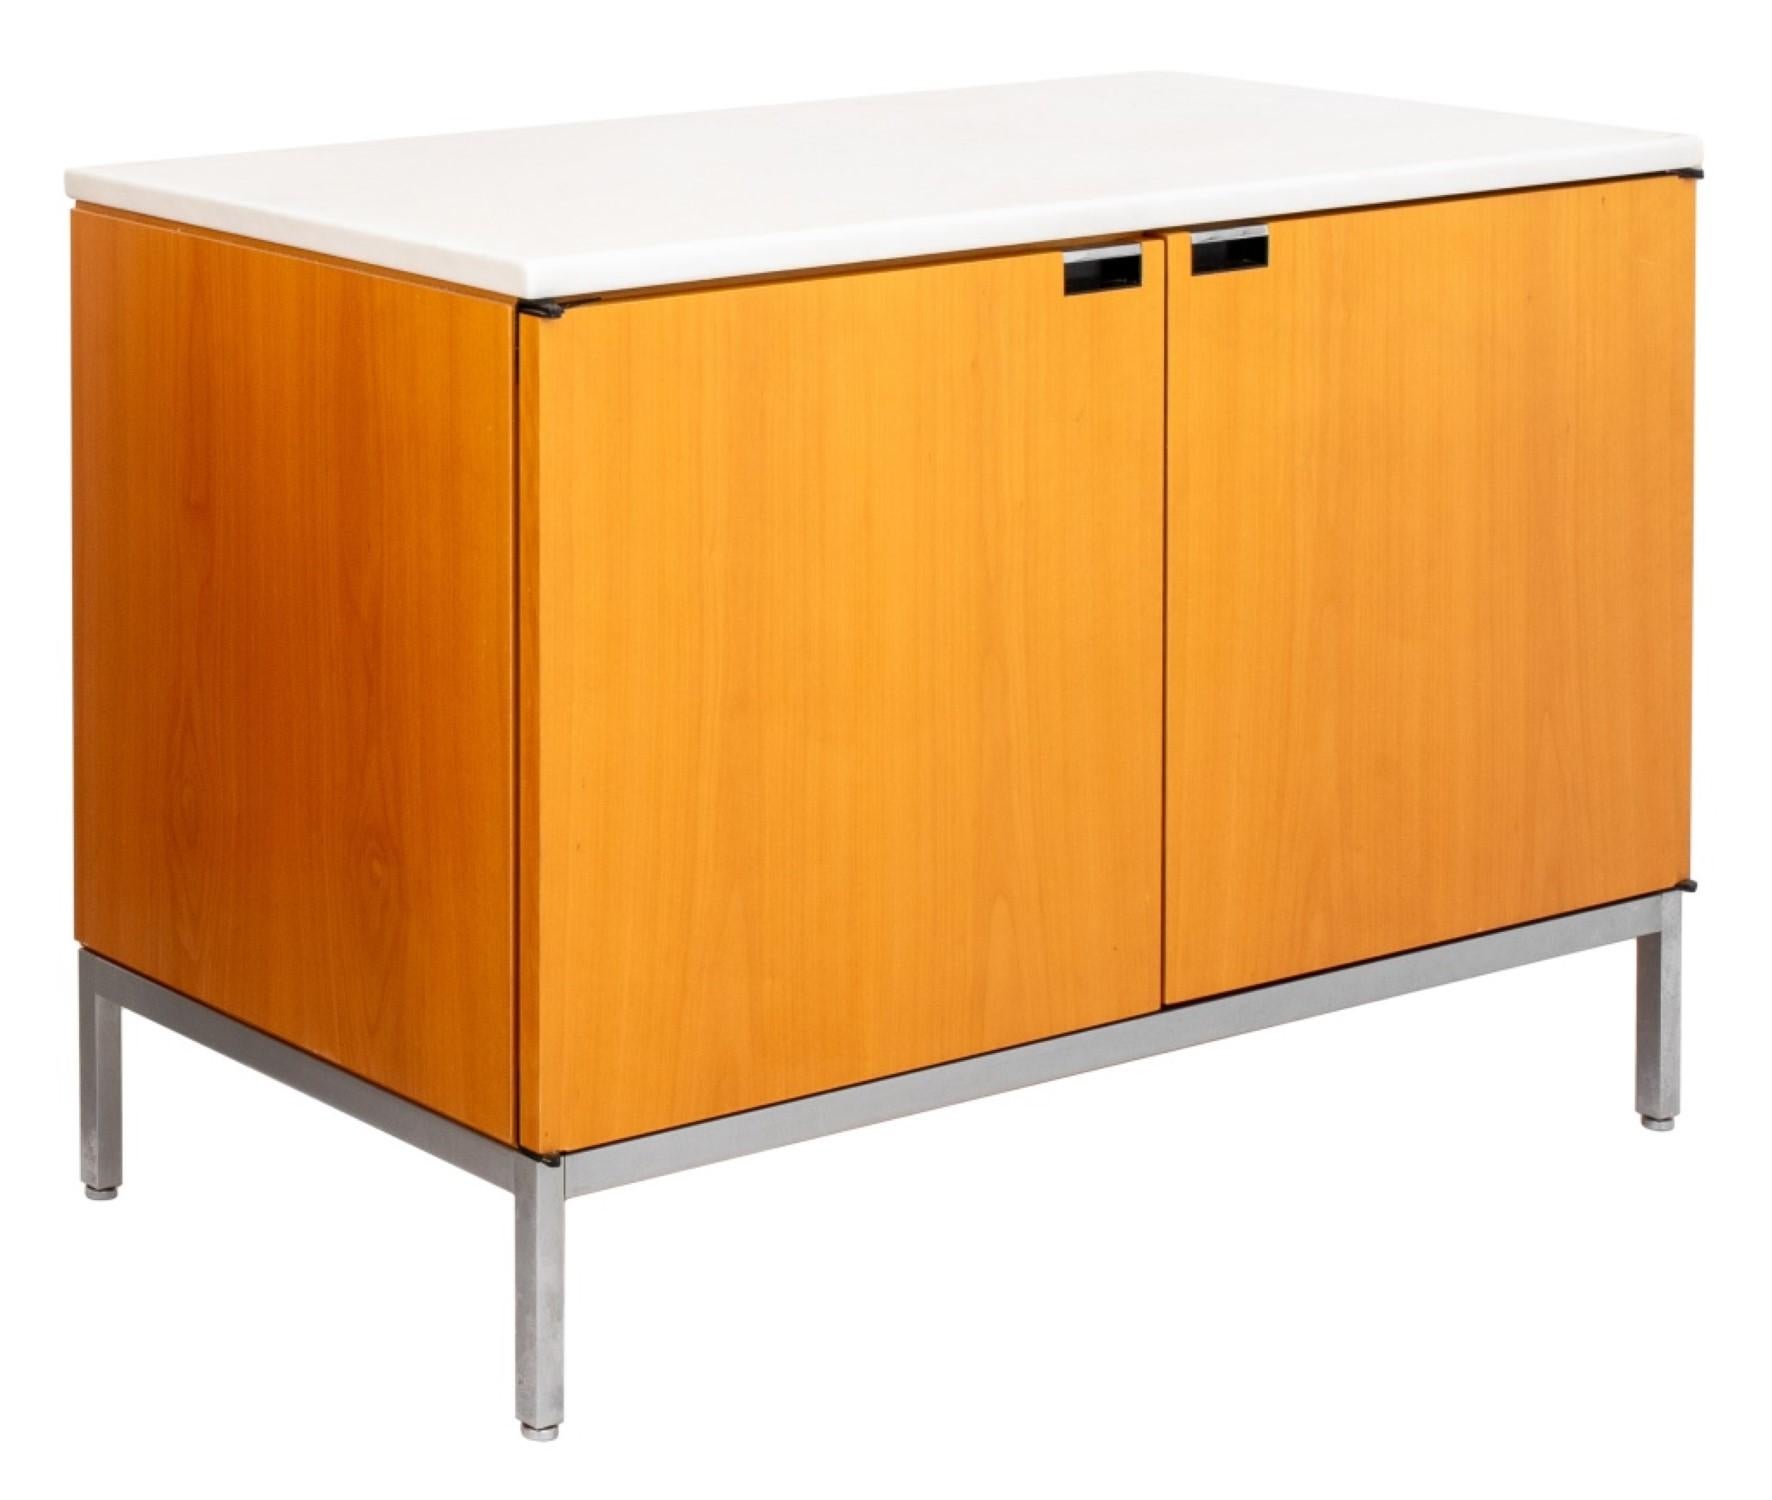 
The Pair of Florence Knoll Style Midcentury Modern Consoles has,

Dimensions of approximately 27.5 inches in height, 37.5 inches in width, and 18 inches in depth.

 These pieces are designed in the manner of Florence Knoll and can be described as